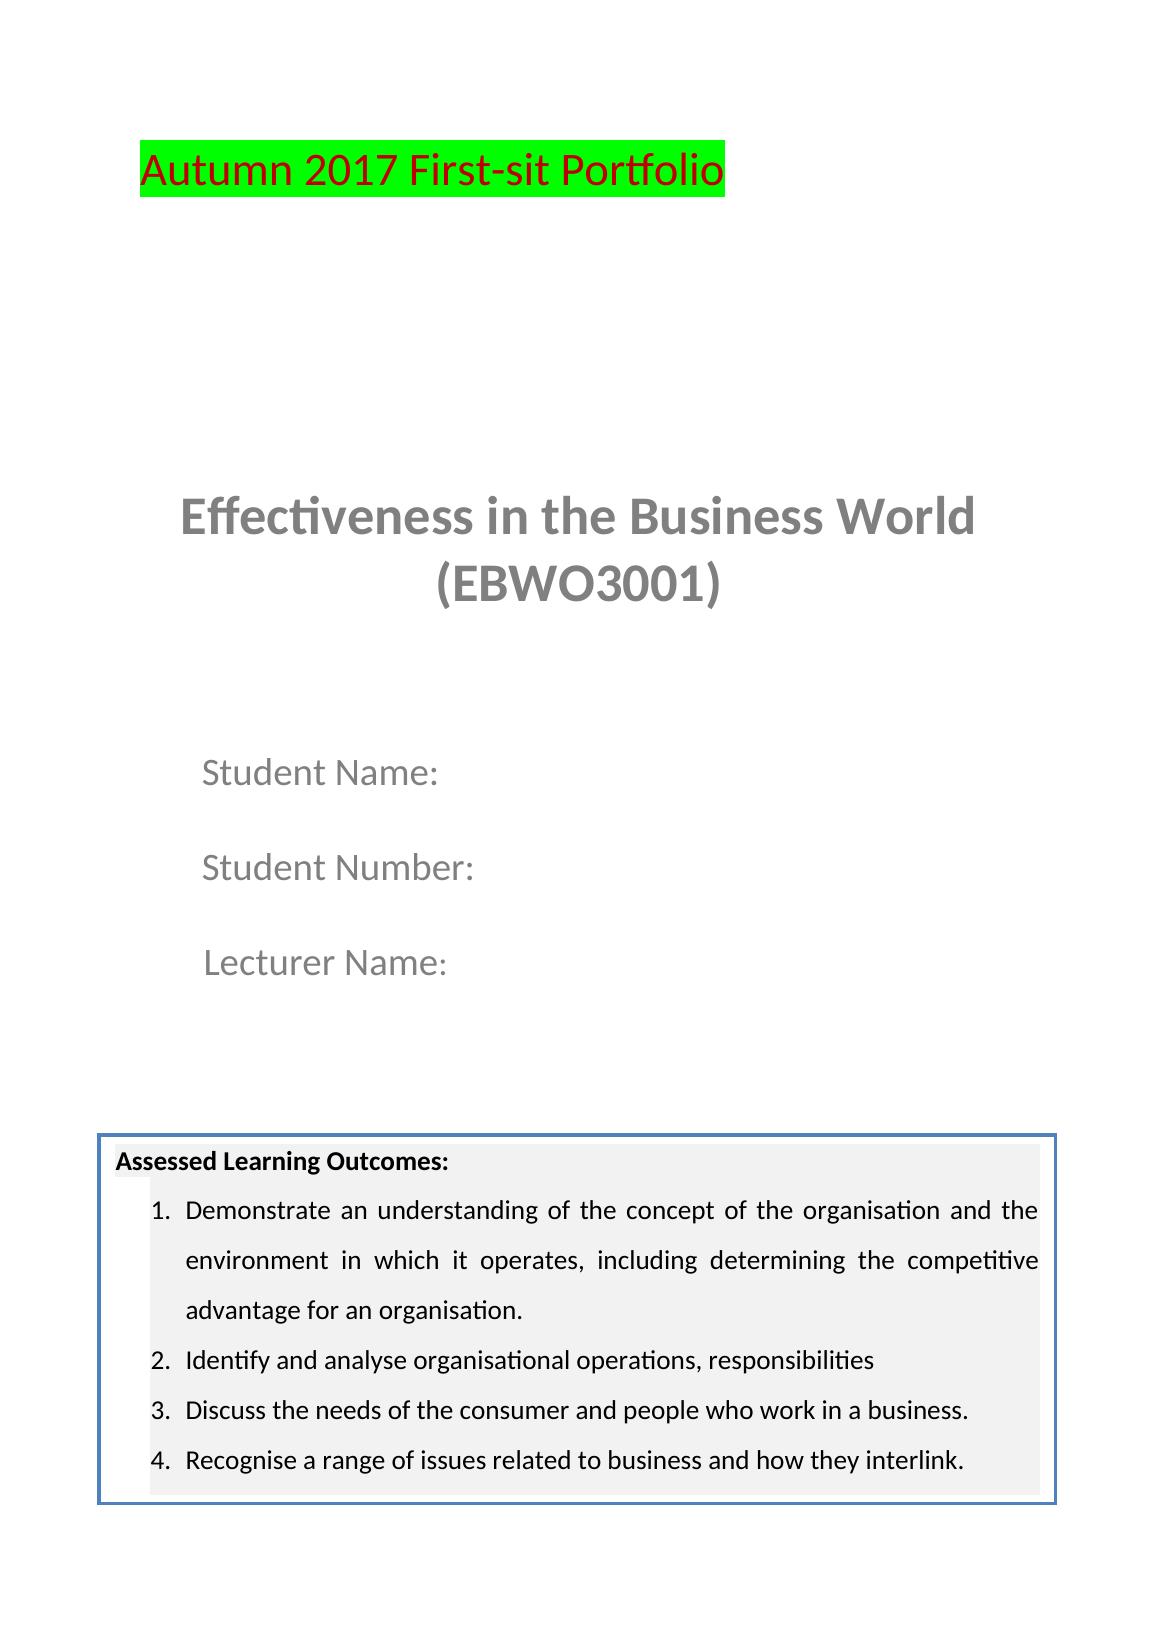 EBWO3001:Effectiveness in the Business World_1